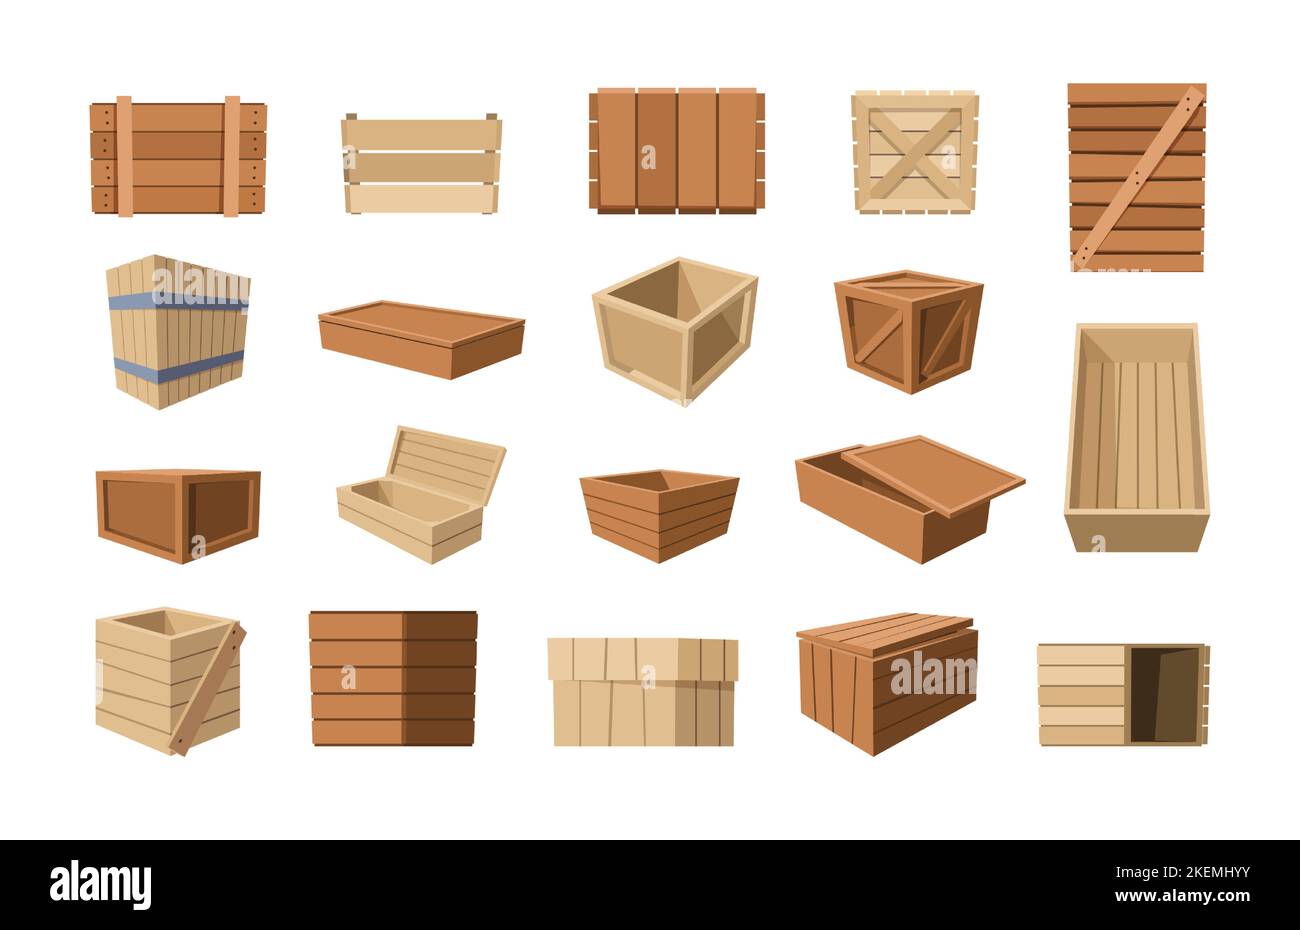 Wood container. Cartoon warehouse with wooden boxes crates pallets containers for delivery goods, market shipment distribution packaging. Vector set of container wood for warehouse Stock Vector